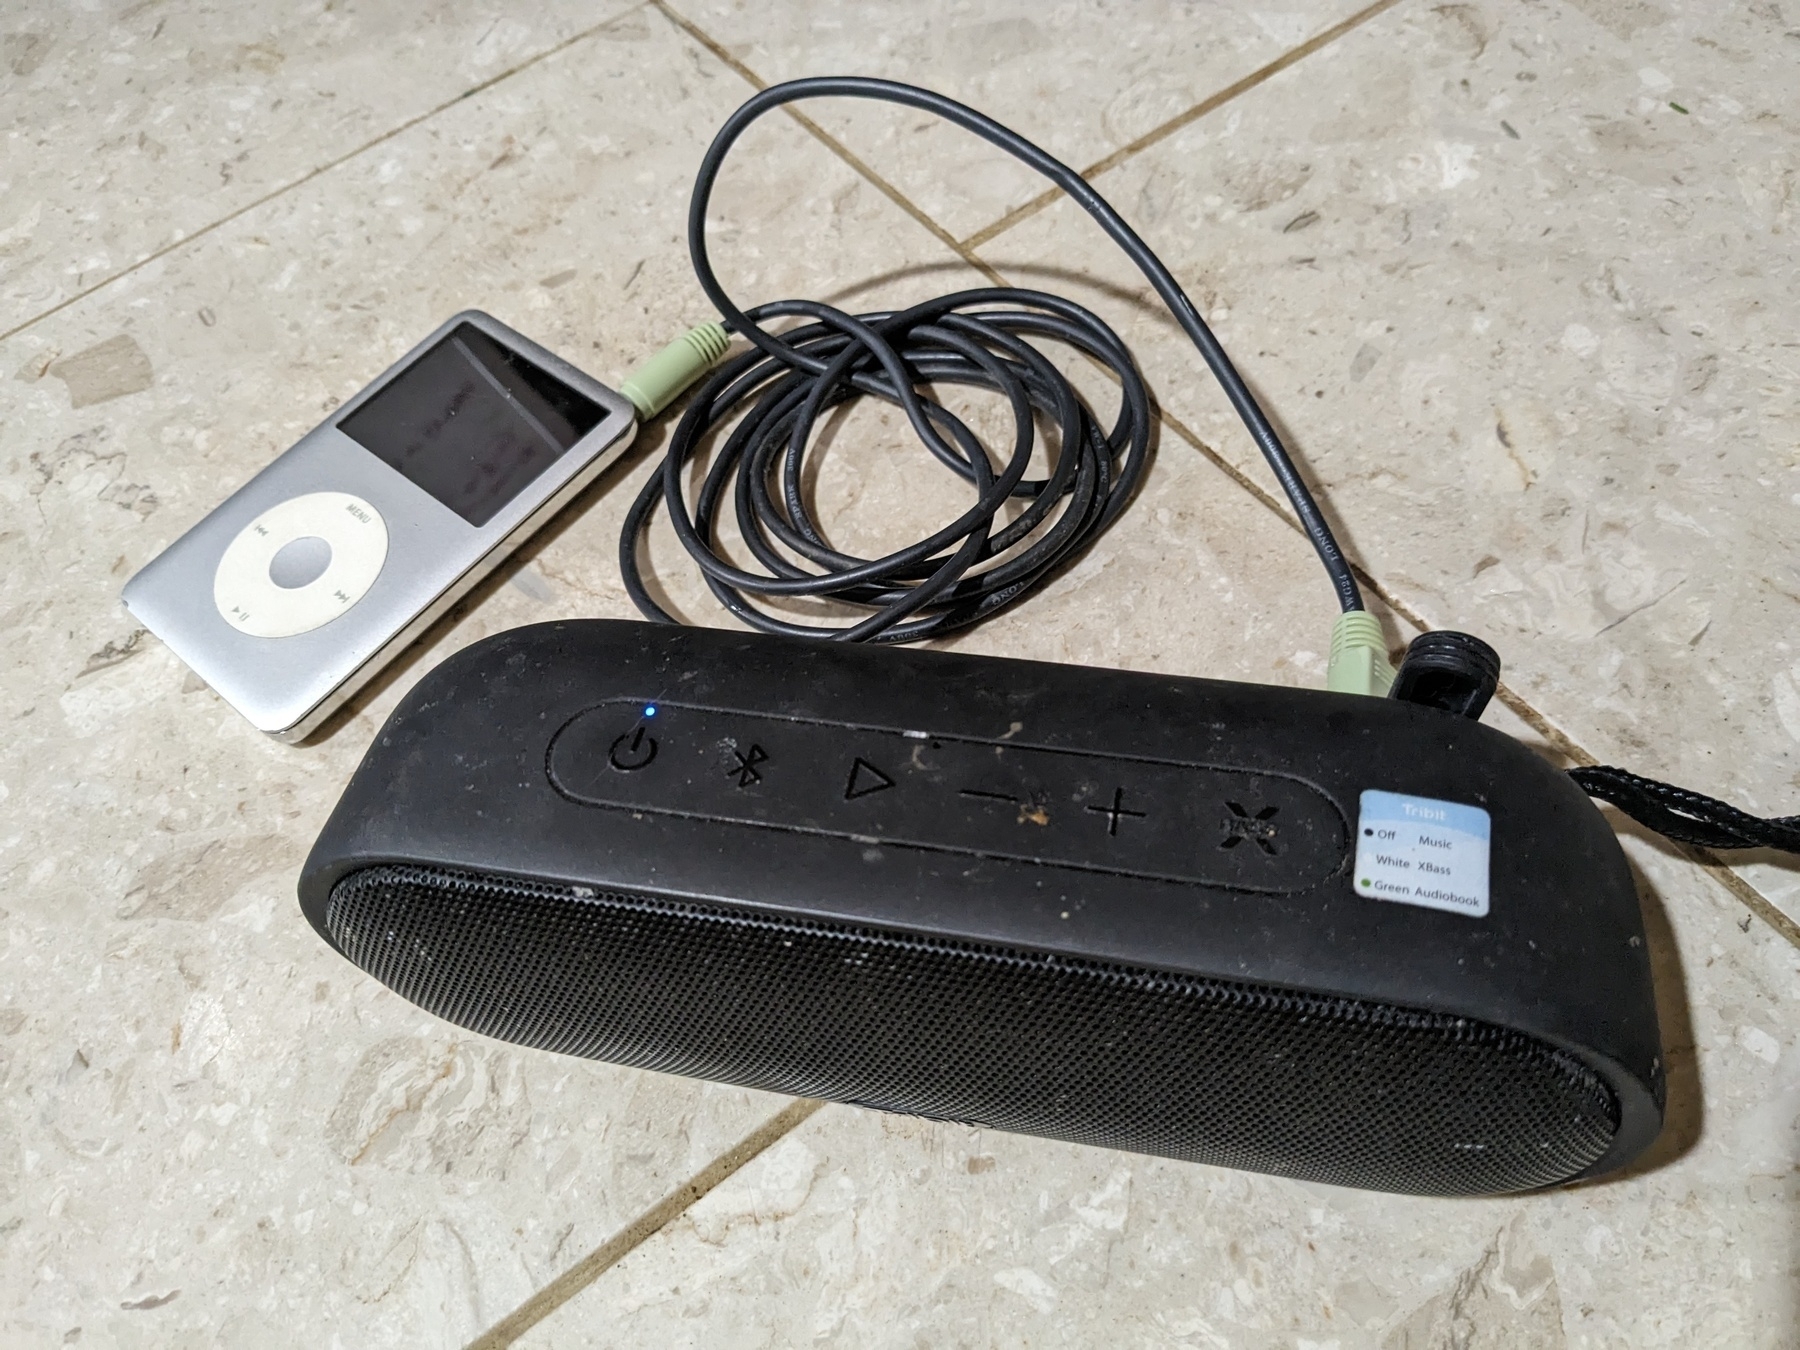 silver iPod connected to Bluetooth speakers with an aux cord